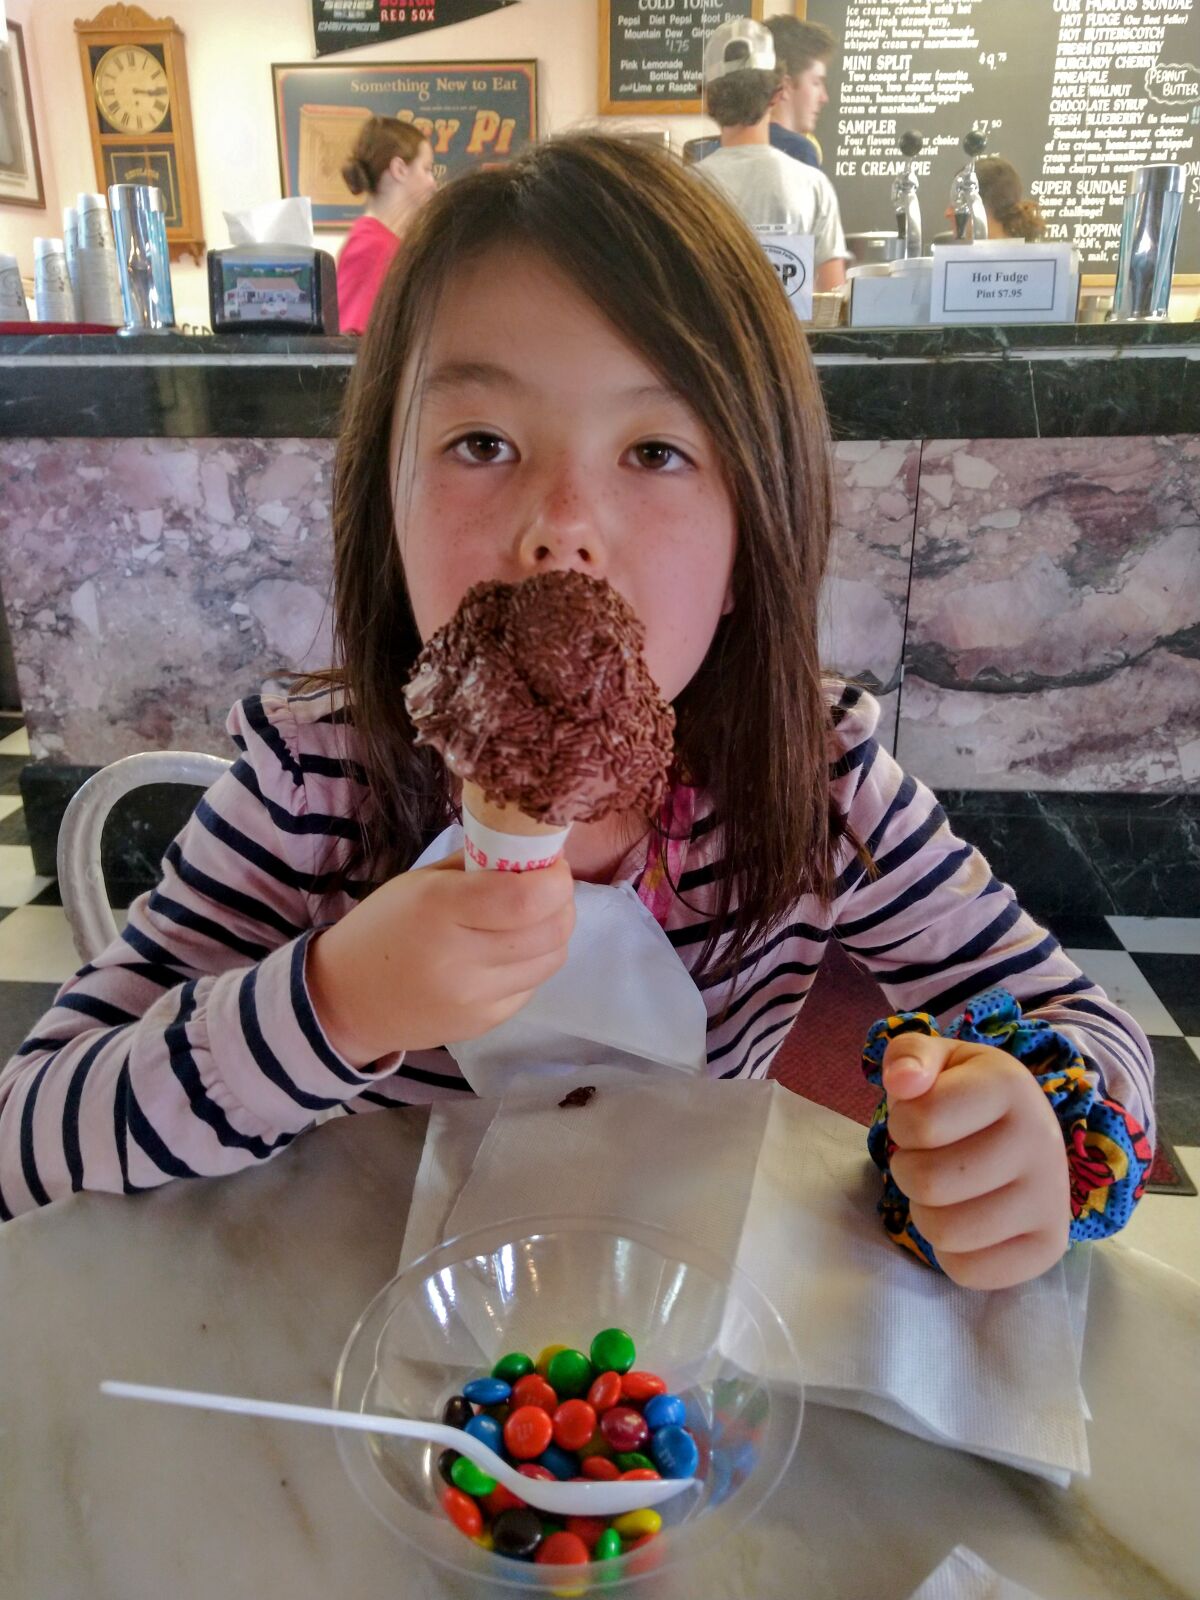 A child takes a bite of chocolate ice cream